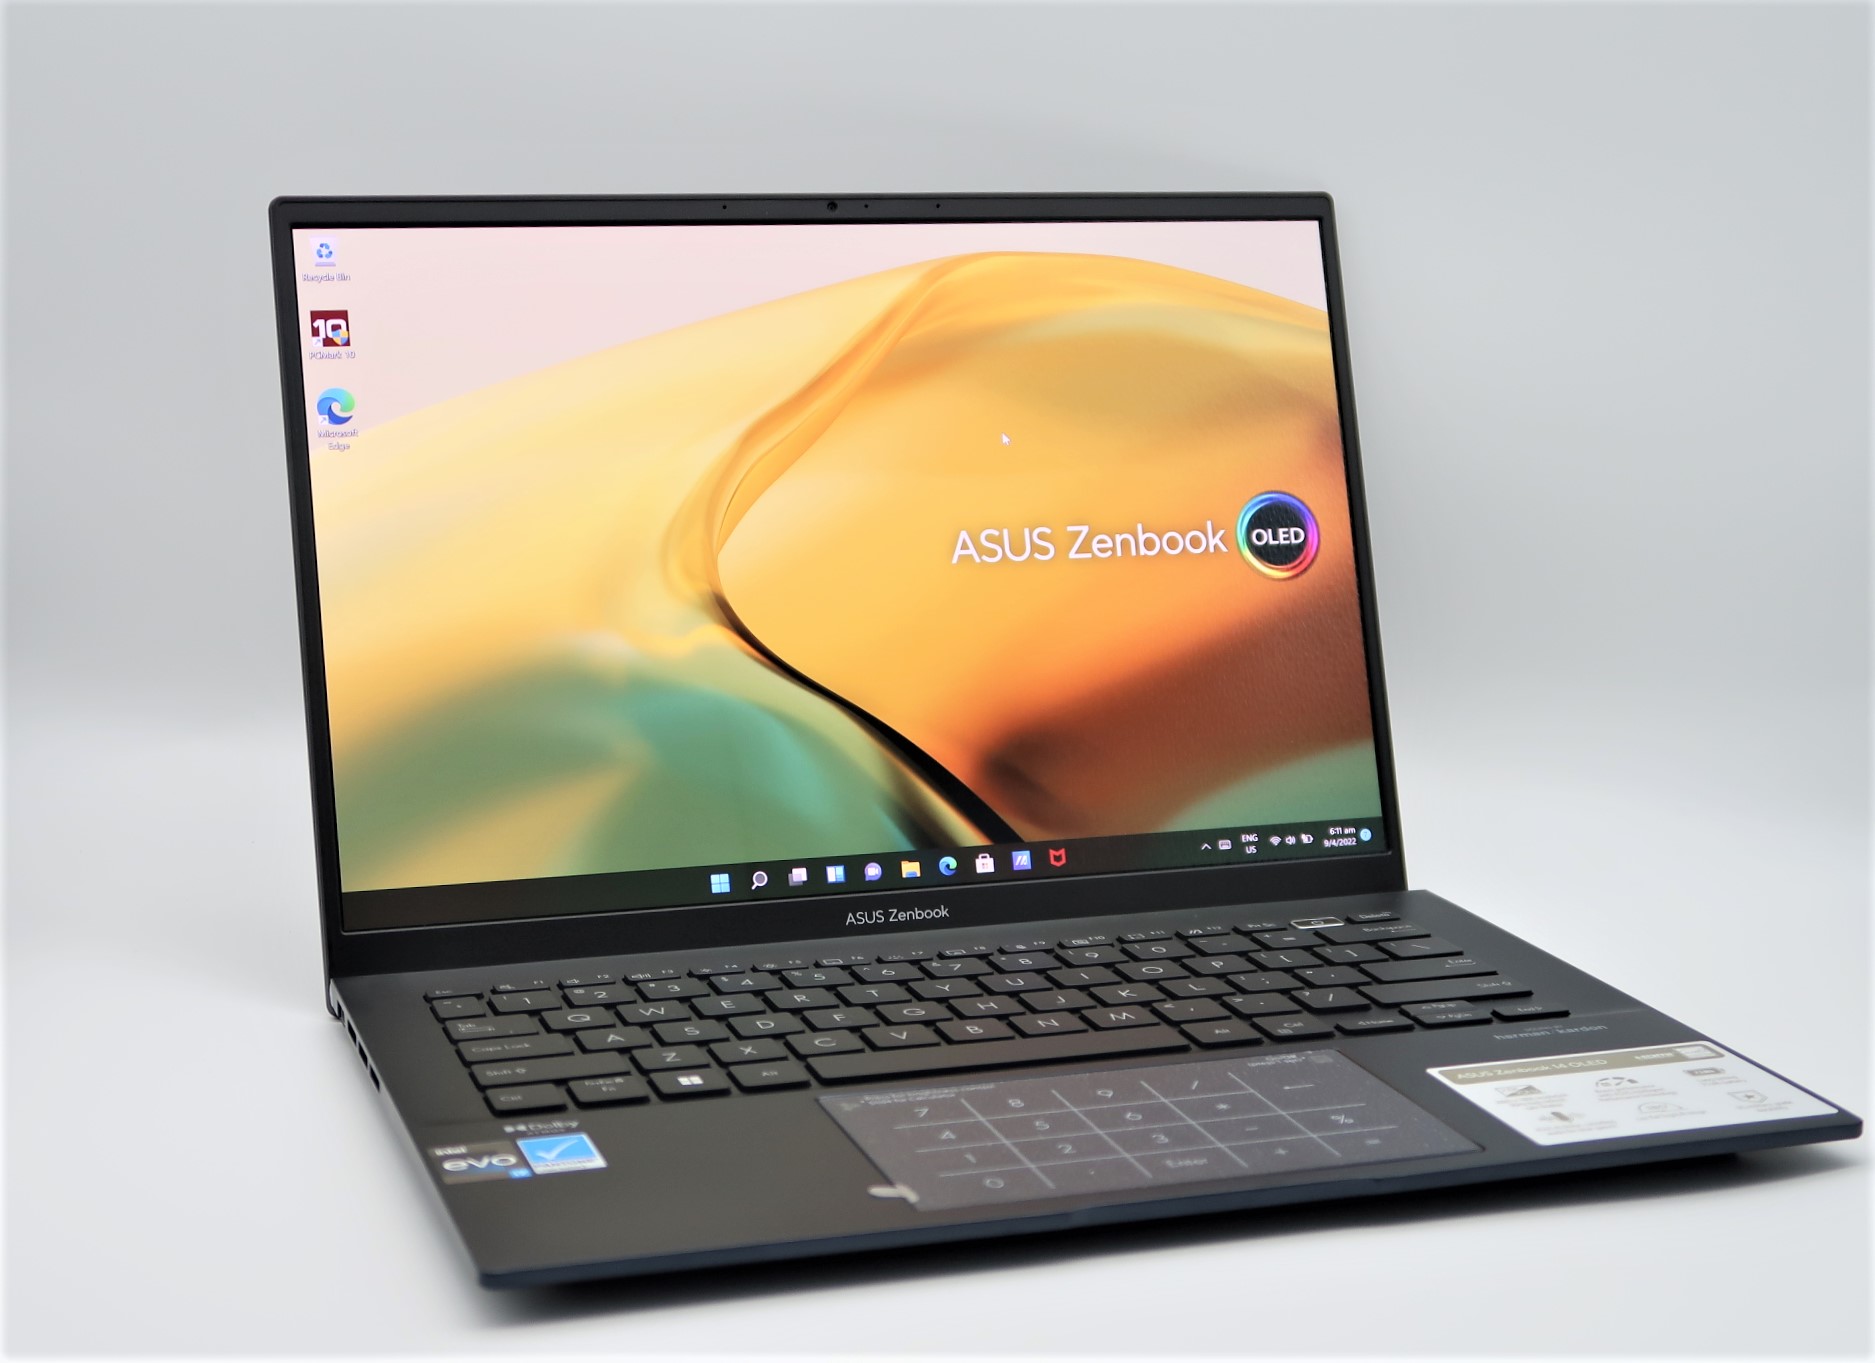 Review of the ASUS Zenbook 14 OLED ultrabook (UX3402)